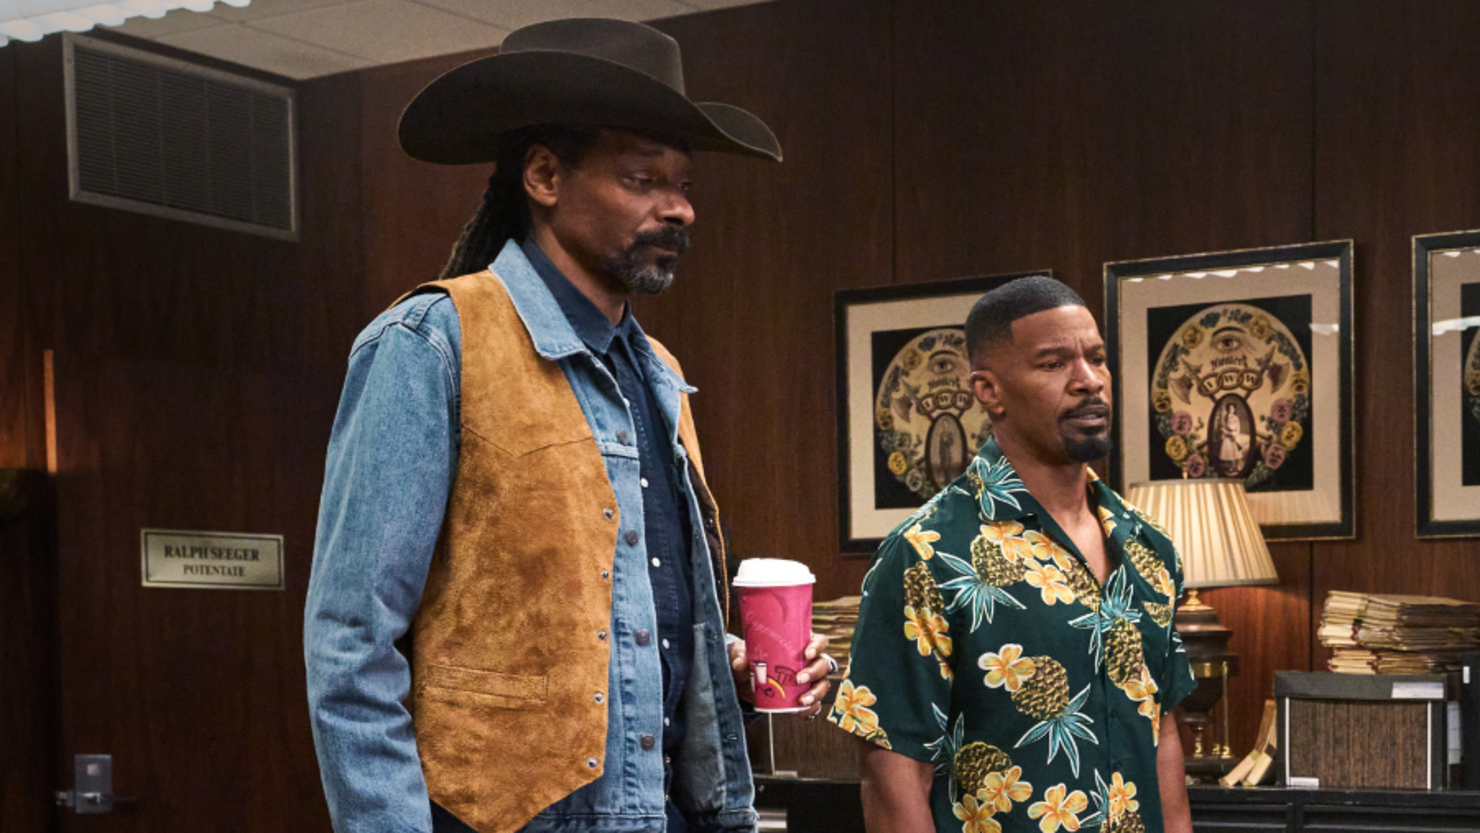 Big John Elliot (Snoop Dogg) wears a tan cowboy vest and ten-gallon hat and sips coffee while standing next to Bud (Jamie Fox), who is wearing a pineapple button up shirt, in Day Shift.